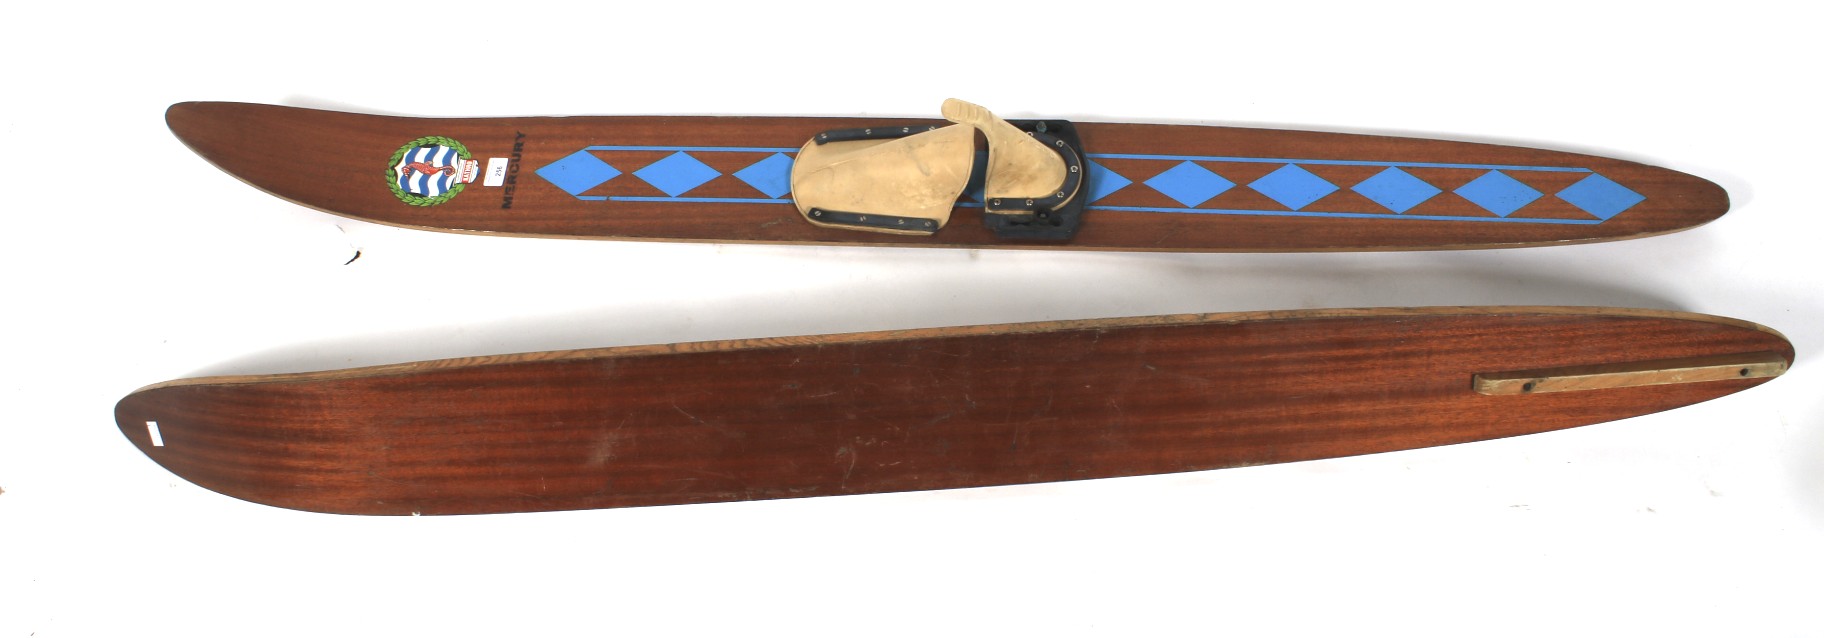 A pair of wooden Mercury skis. - Image 2 of 2